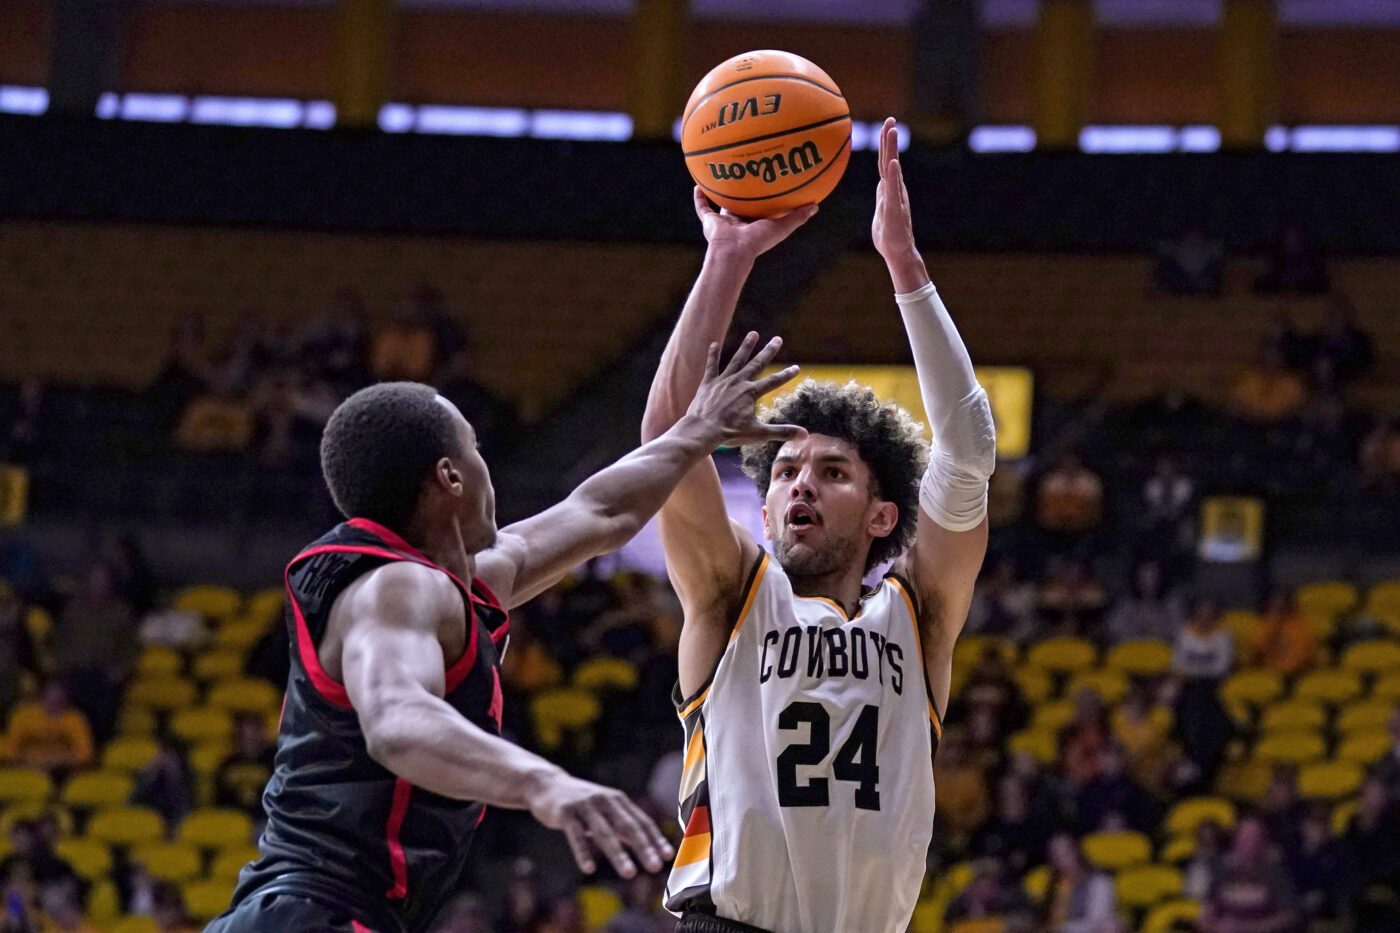 Wyoming vs Boise State 1/14/23 College Basketball Picks, Predictions, Odds